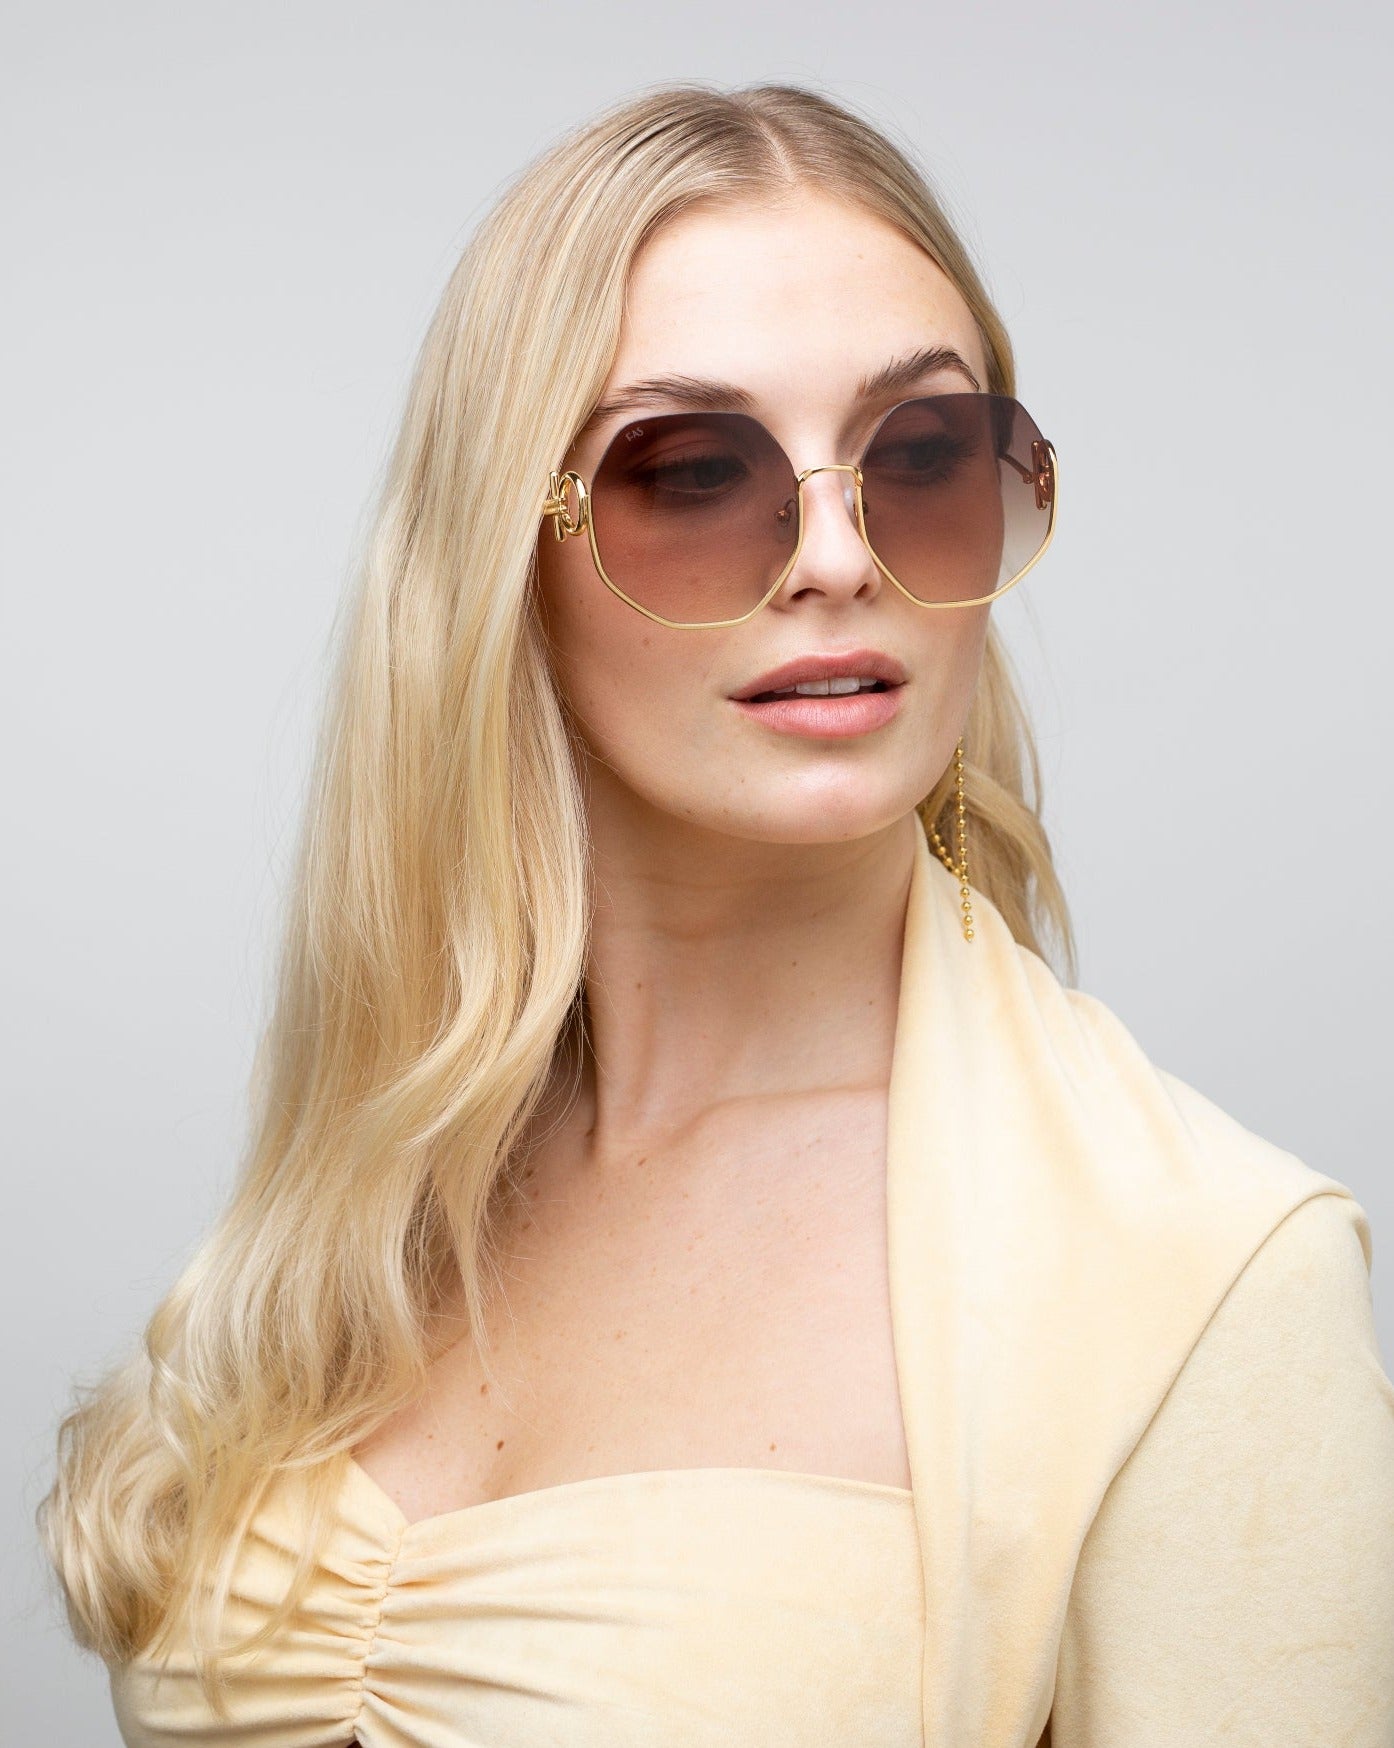 A woman with long, blonde hair is wearing large, stylish For Art&#39;s Sake® Palace sunglasses with 18-karat gold-plated frames and brown-tinted, UVA &amp; UVB-protected lenses. She is dressed in a light beige outfit and is looking slightly to the side with a neutral expression. The background is plain and light gray.